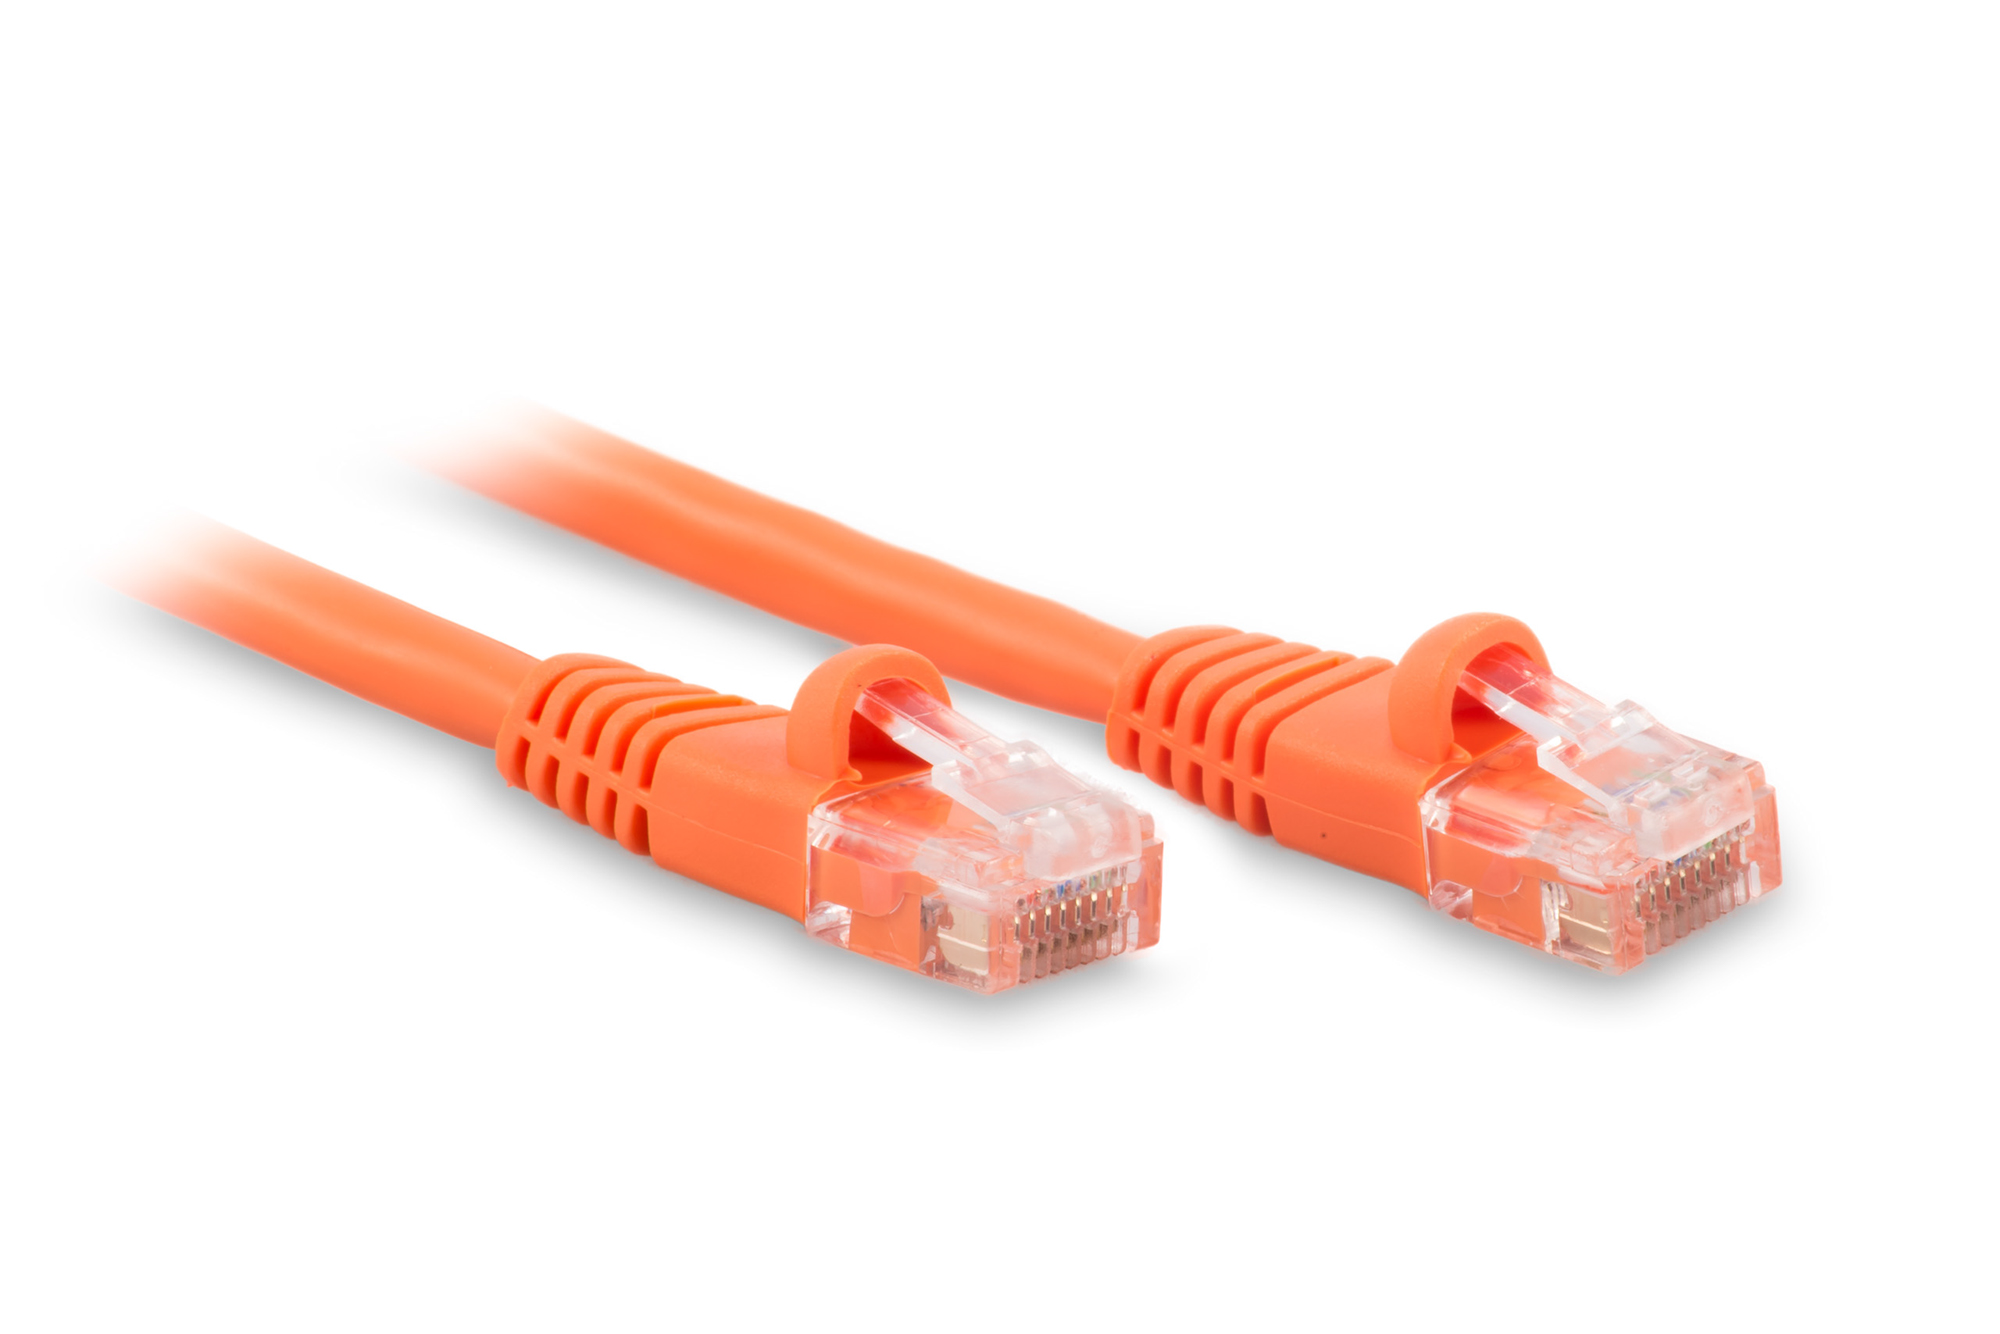 75ft Cat6 Ethernet Patch Cable - Orange Color - Snagless Boot